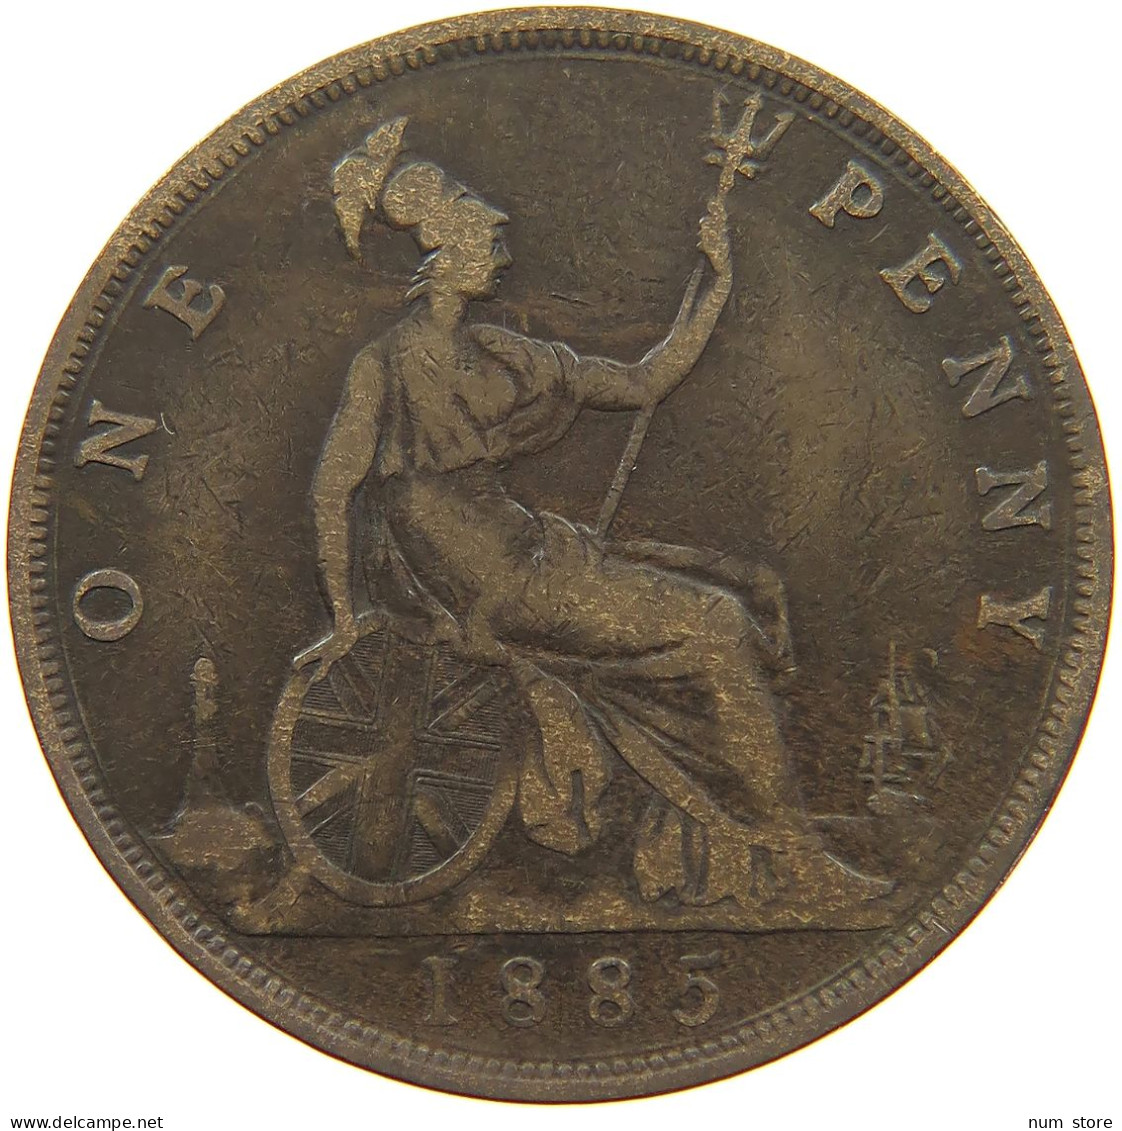 GREAT BRITAIN PENNY 1885 Victoria 1837-1901 #a065 0509 - D. 1 Penny